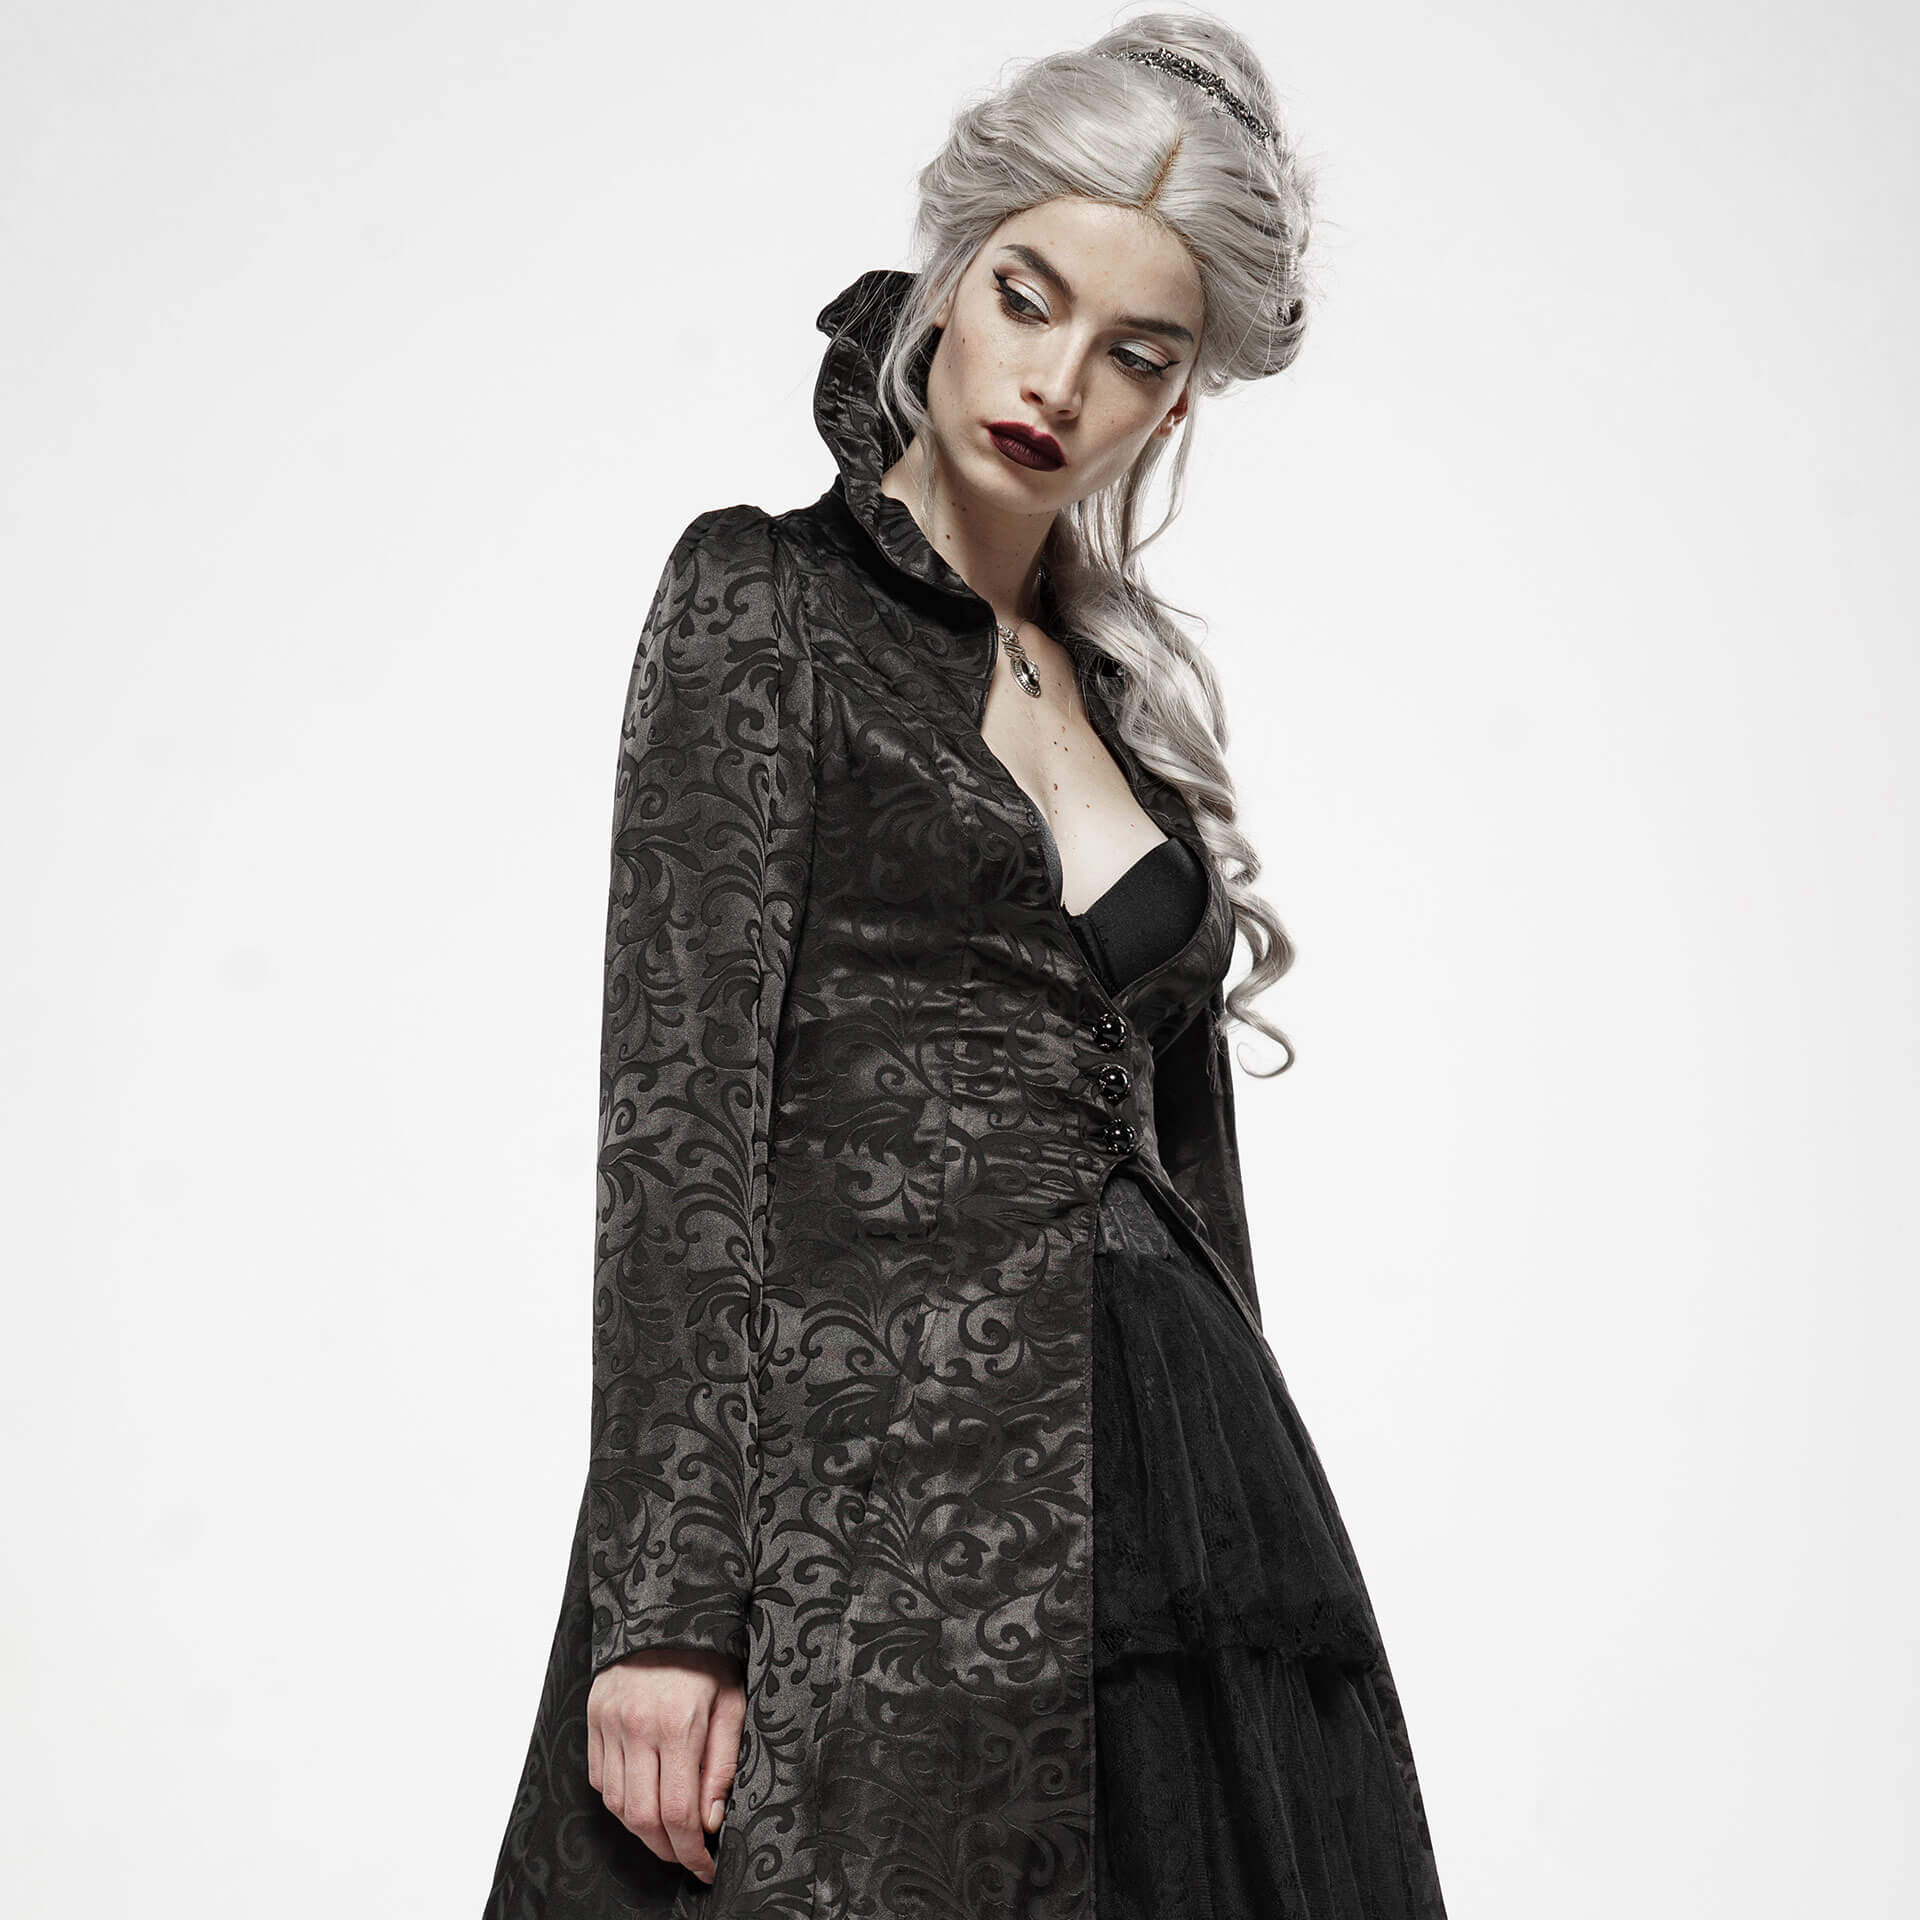 Obsidian Queen Coat WY-1137/BK by PUNK RAVE brand